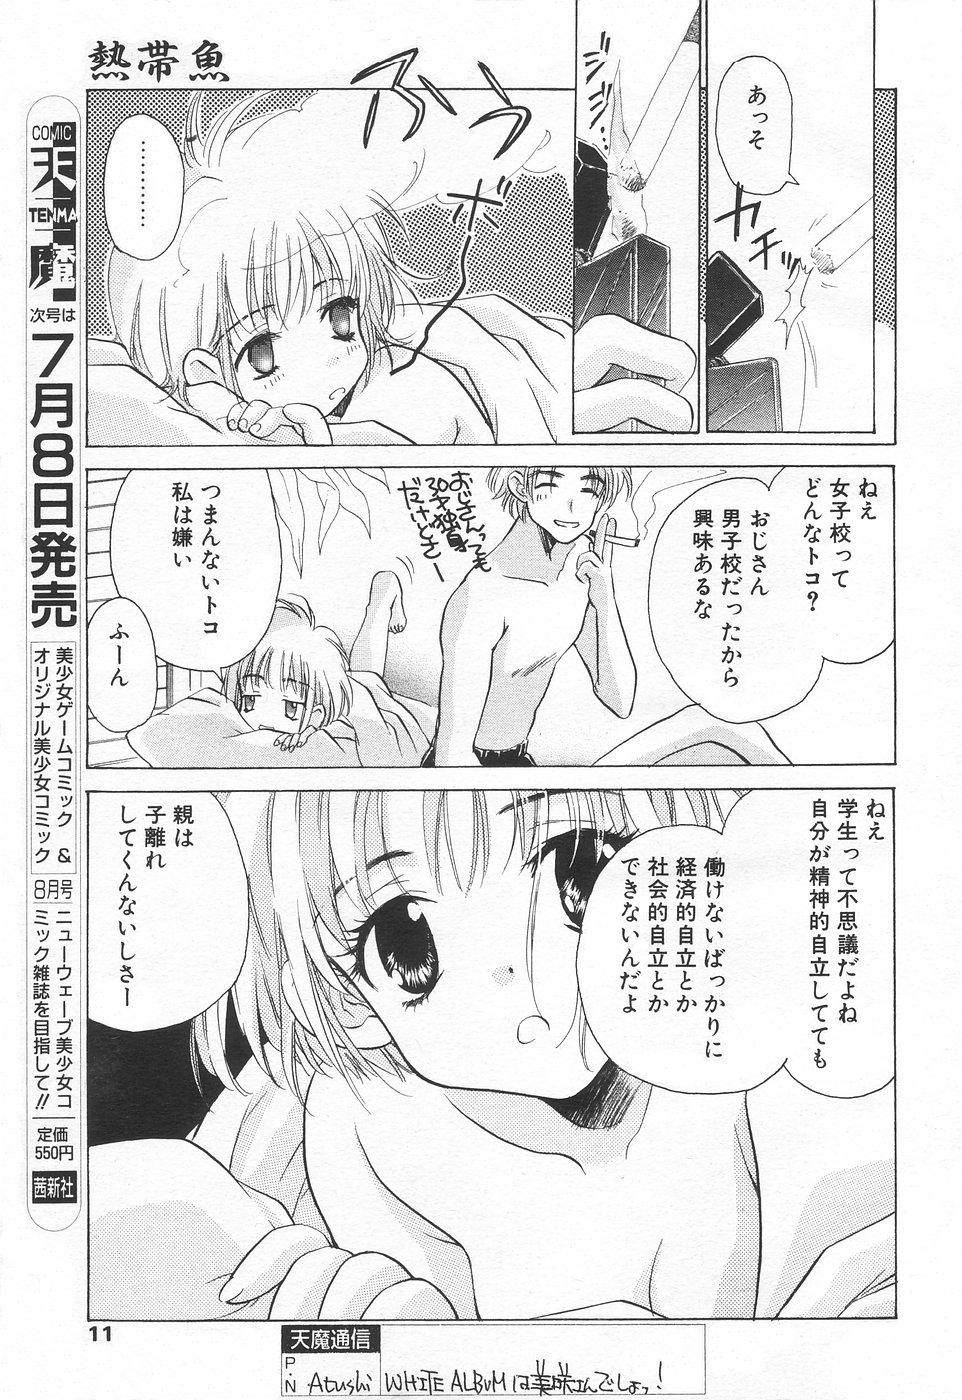 Extreme COMIC Tenma 1998-07 Lesbos - Page 11